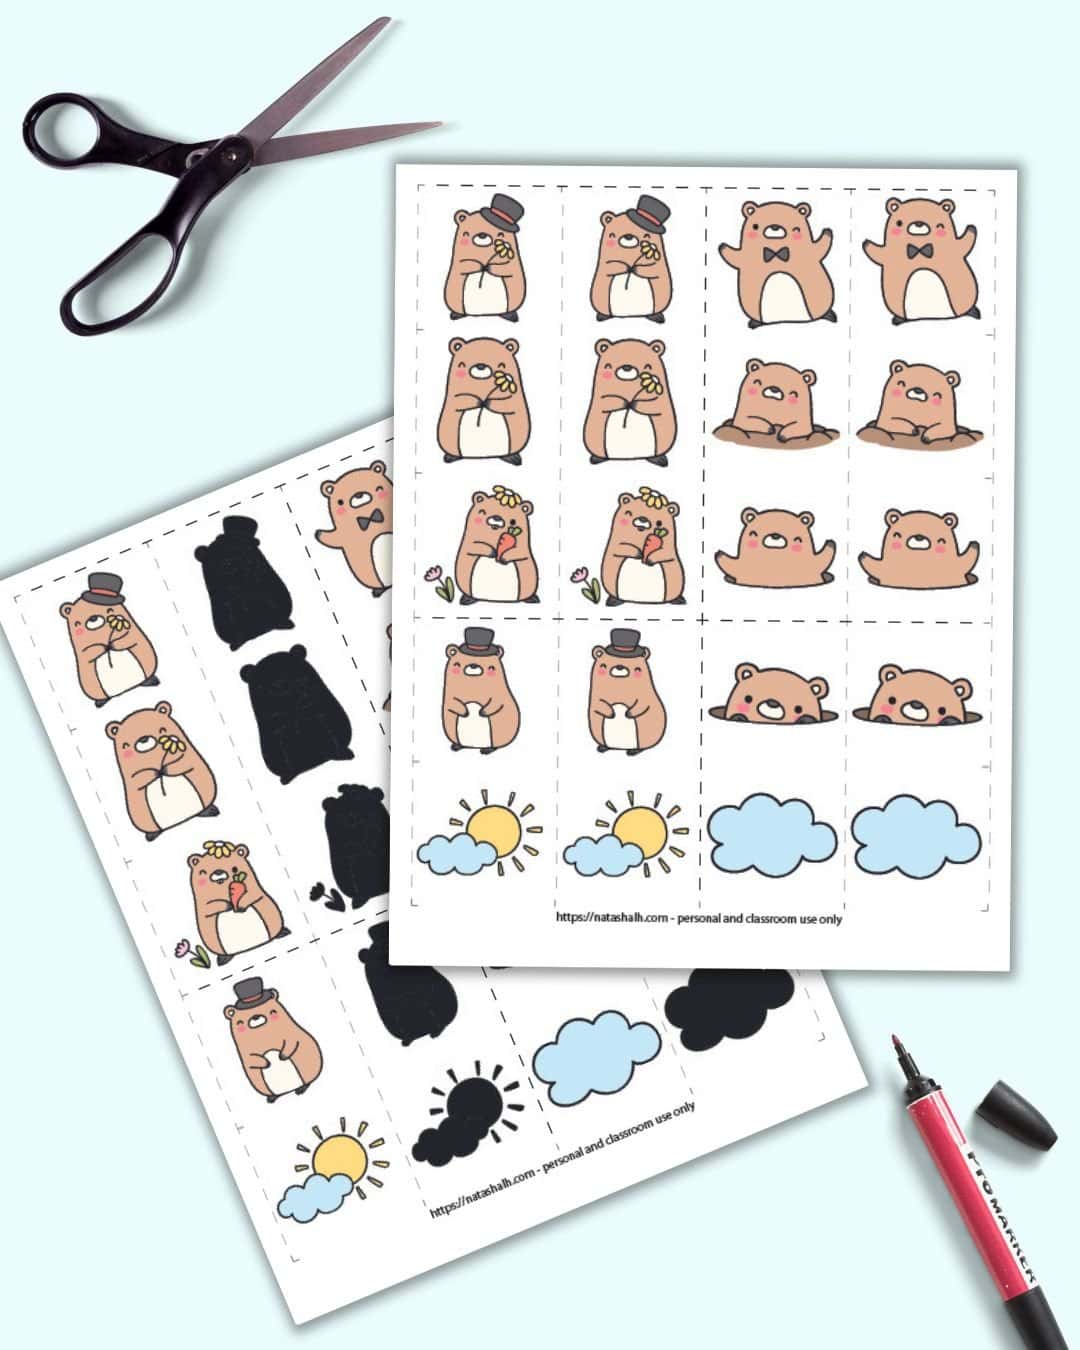 A preview of two pages of printable Groundhog's Day themed matching cards. Each page has 10 pairs of matching card to cut out. One page has "regular" matching cards and the other has shadow matching cards.